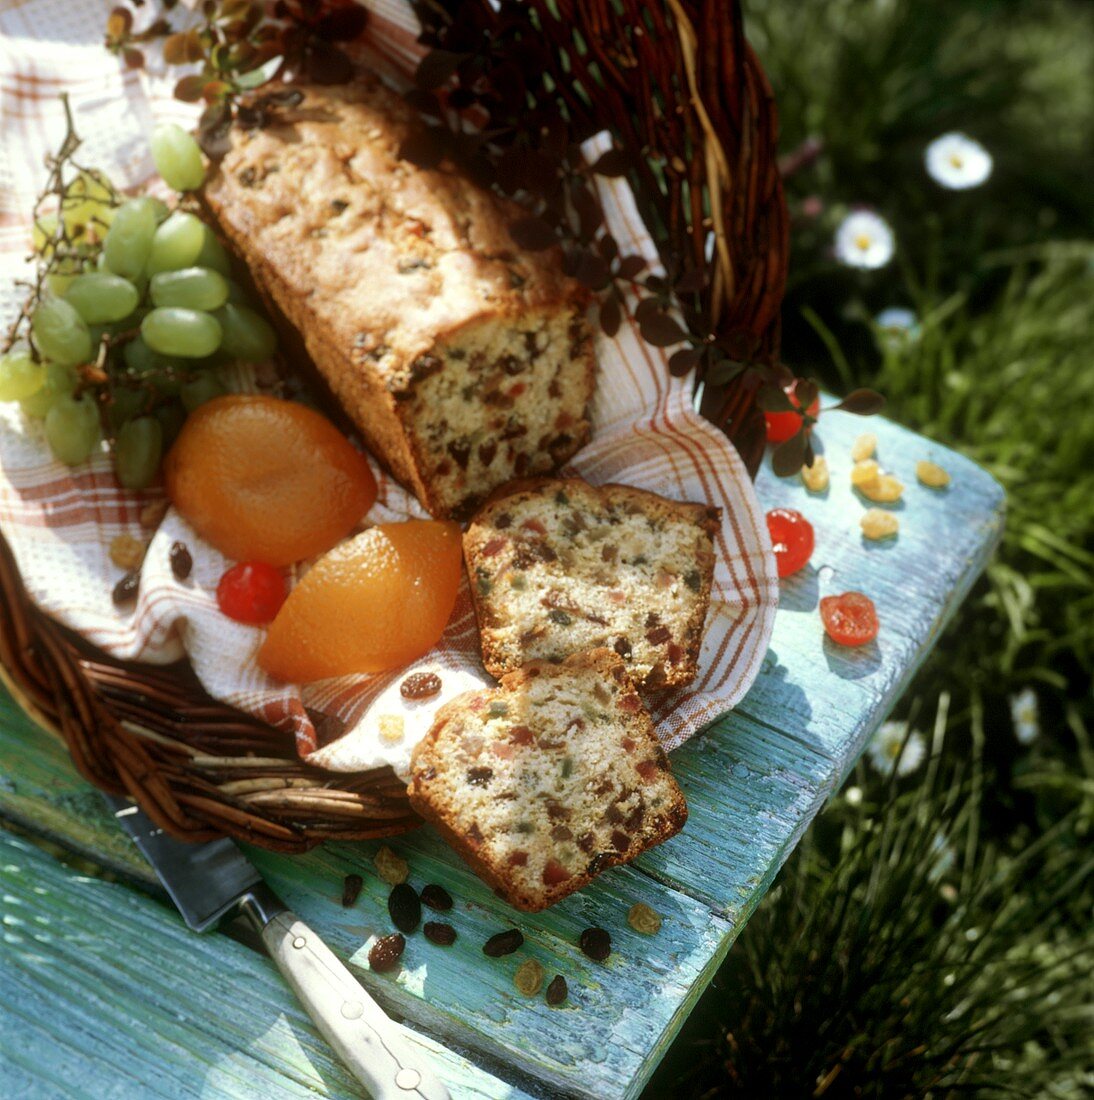 Cake with crystallised fruit in a basket on grass